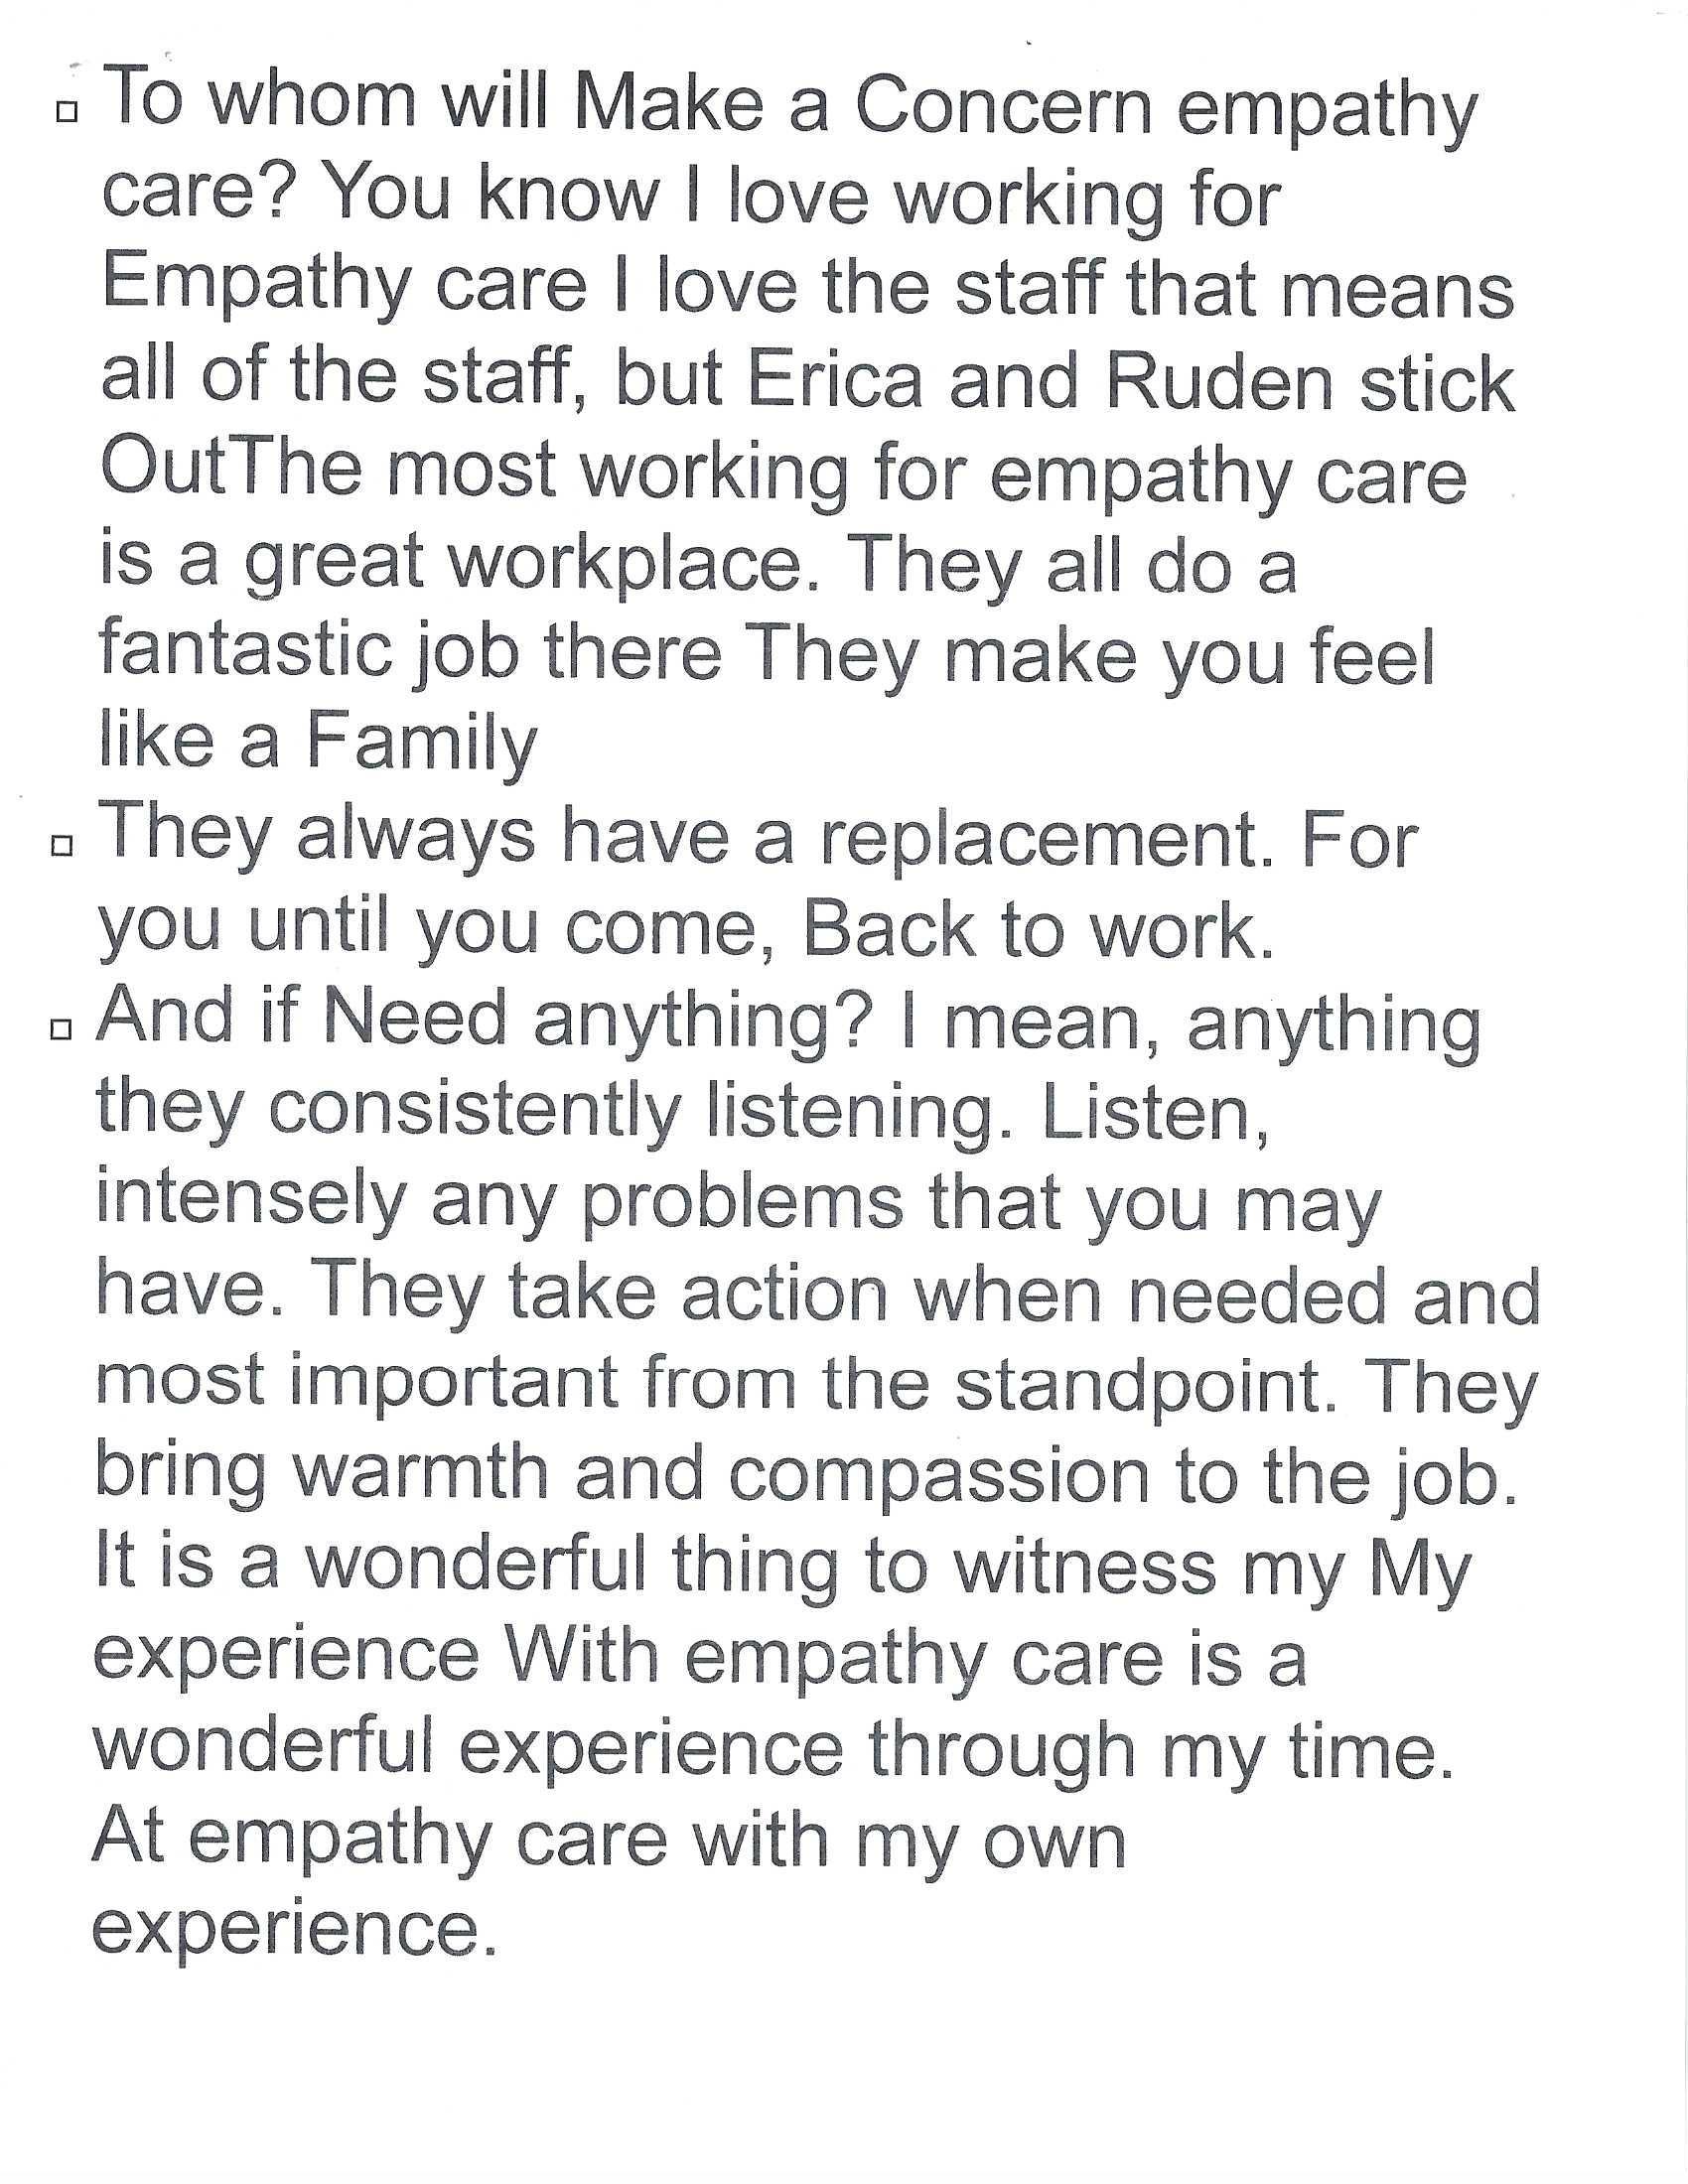 Letters of Recommendation - Empathy Care 2023 (1)_Page_08